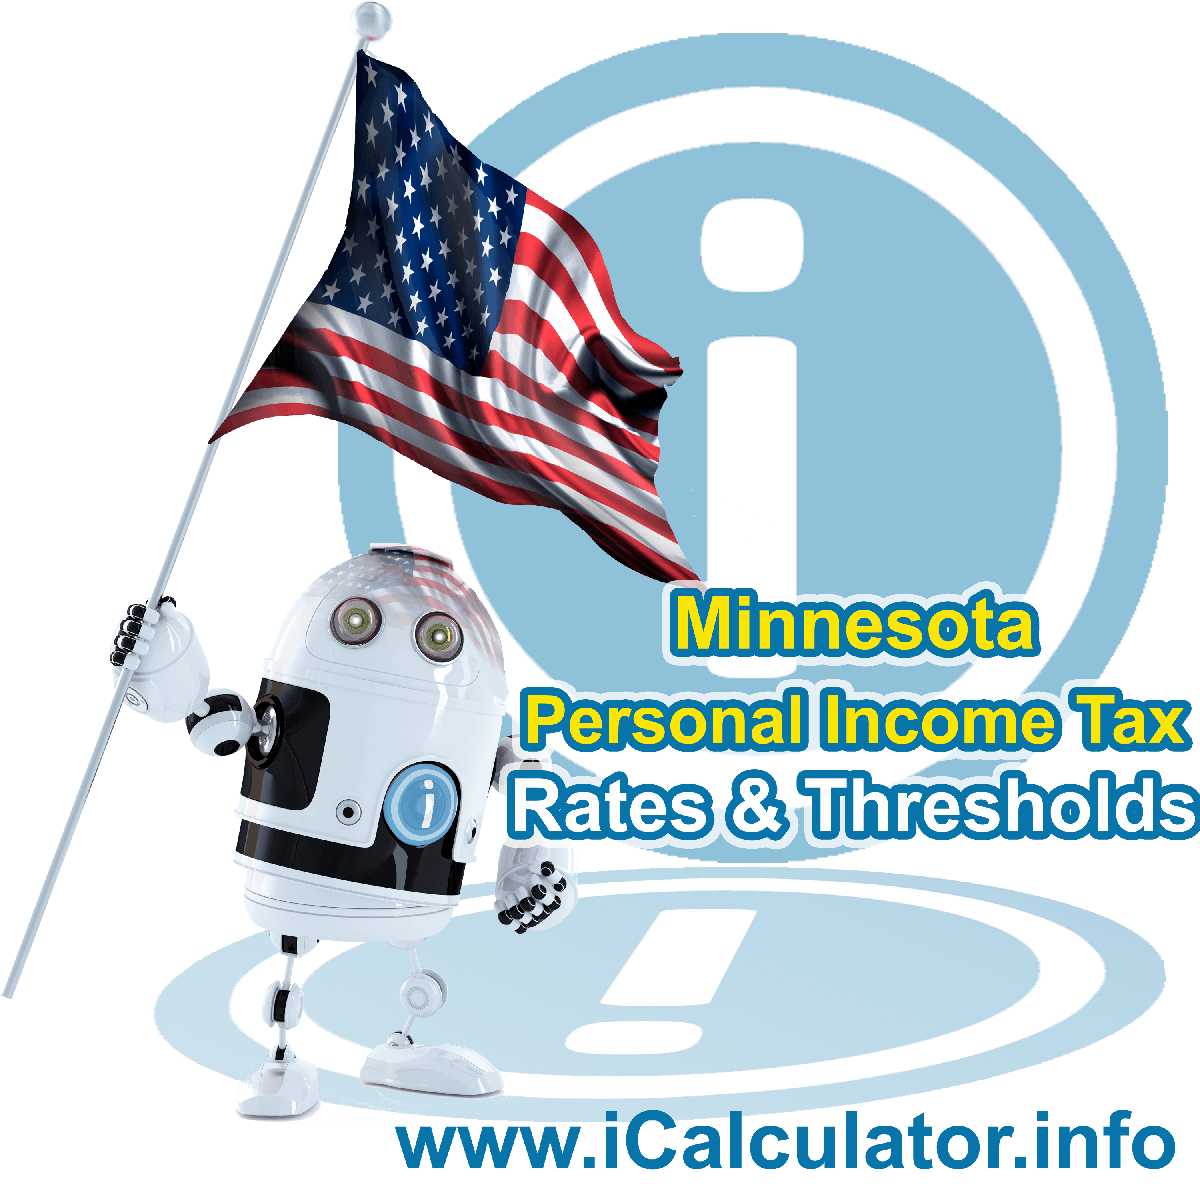 Minnesota State Tax Tables 2020. This image displays details of the Minnesota State Tax Tables for the 2020 tax return year which is provided in support of the 2020 US Tax Calculator